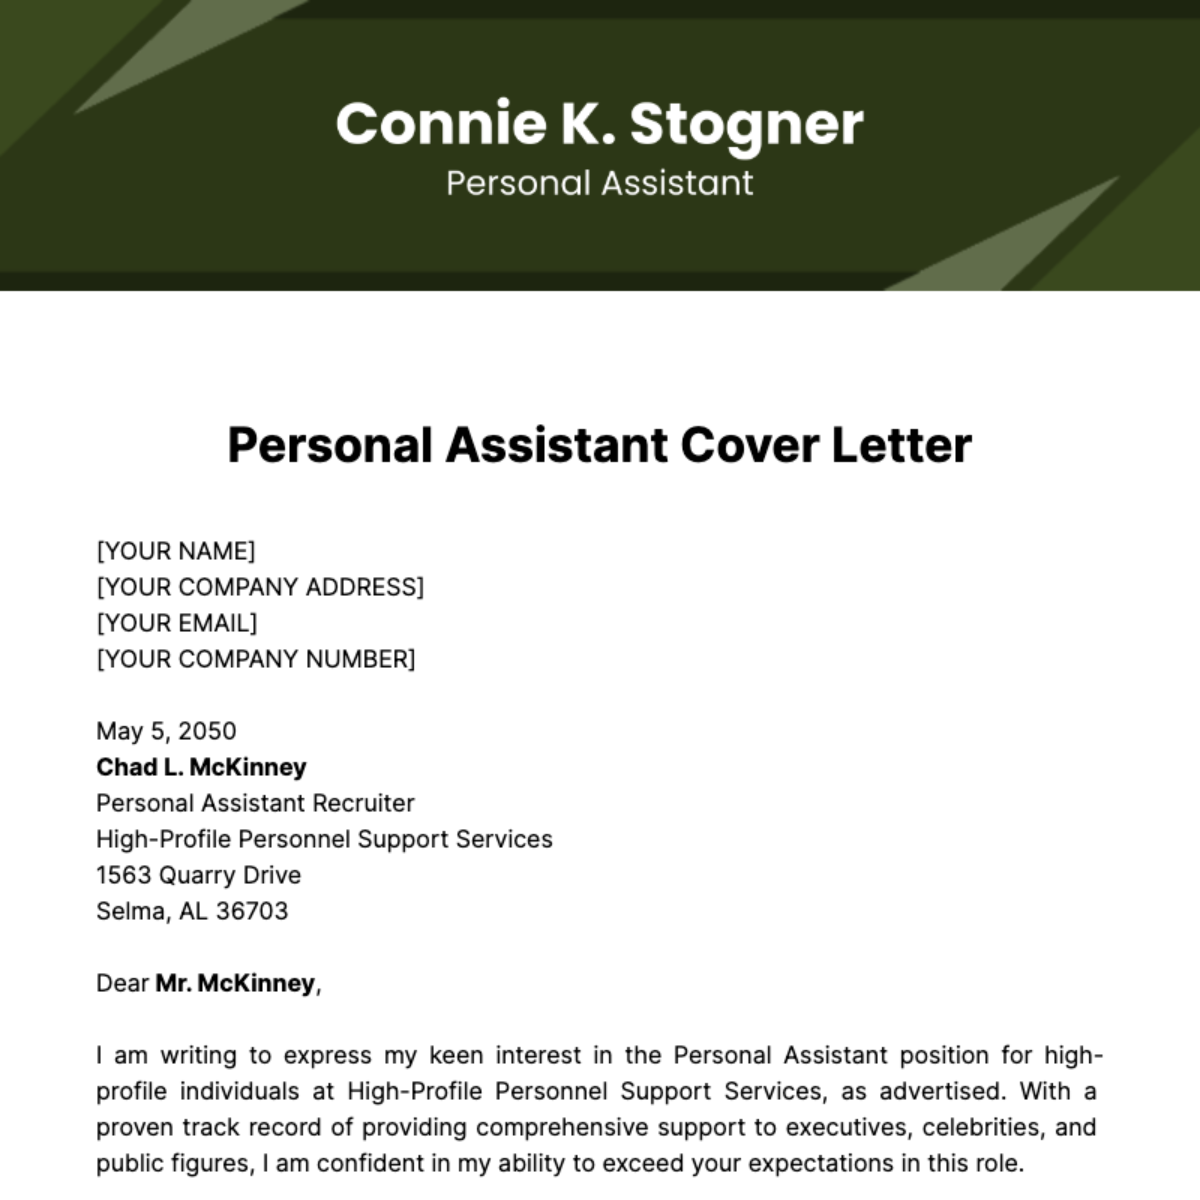 Personal Assistant Cover Letter Template